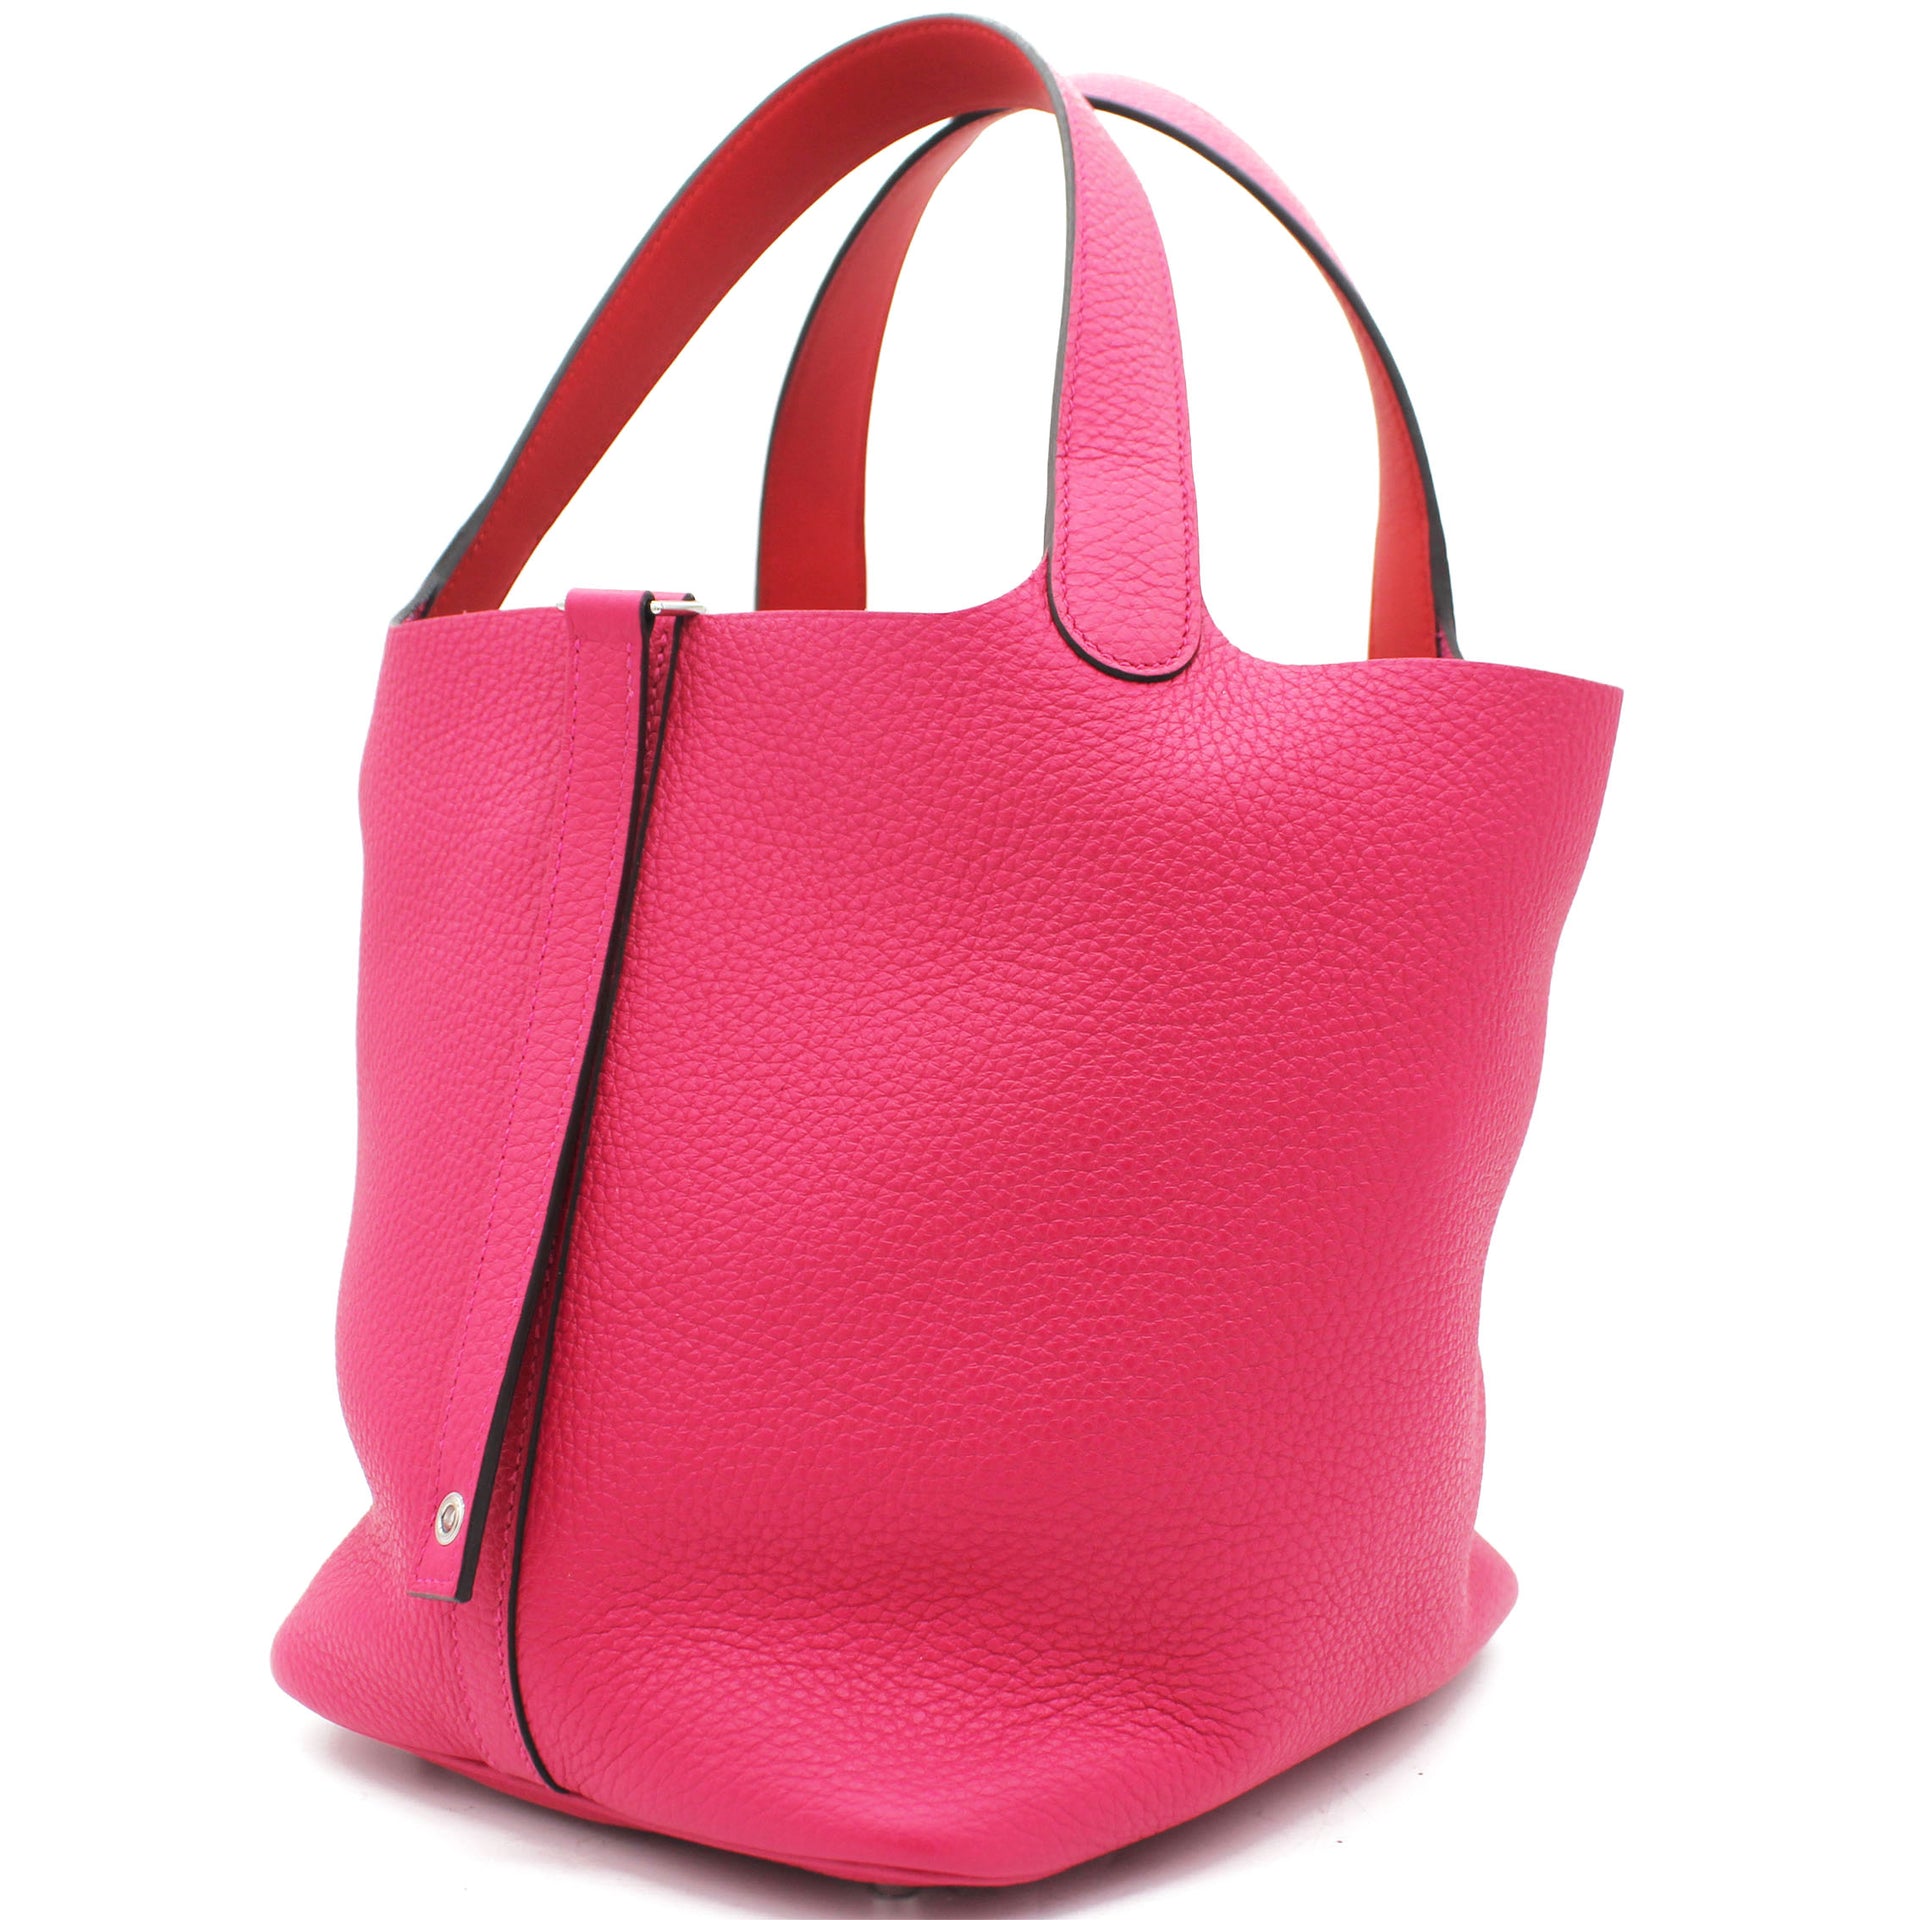 Pink Taurillon Clemence Leather Picotin Lock 22 Bag